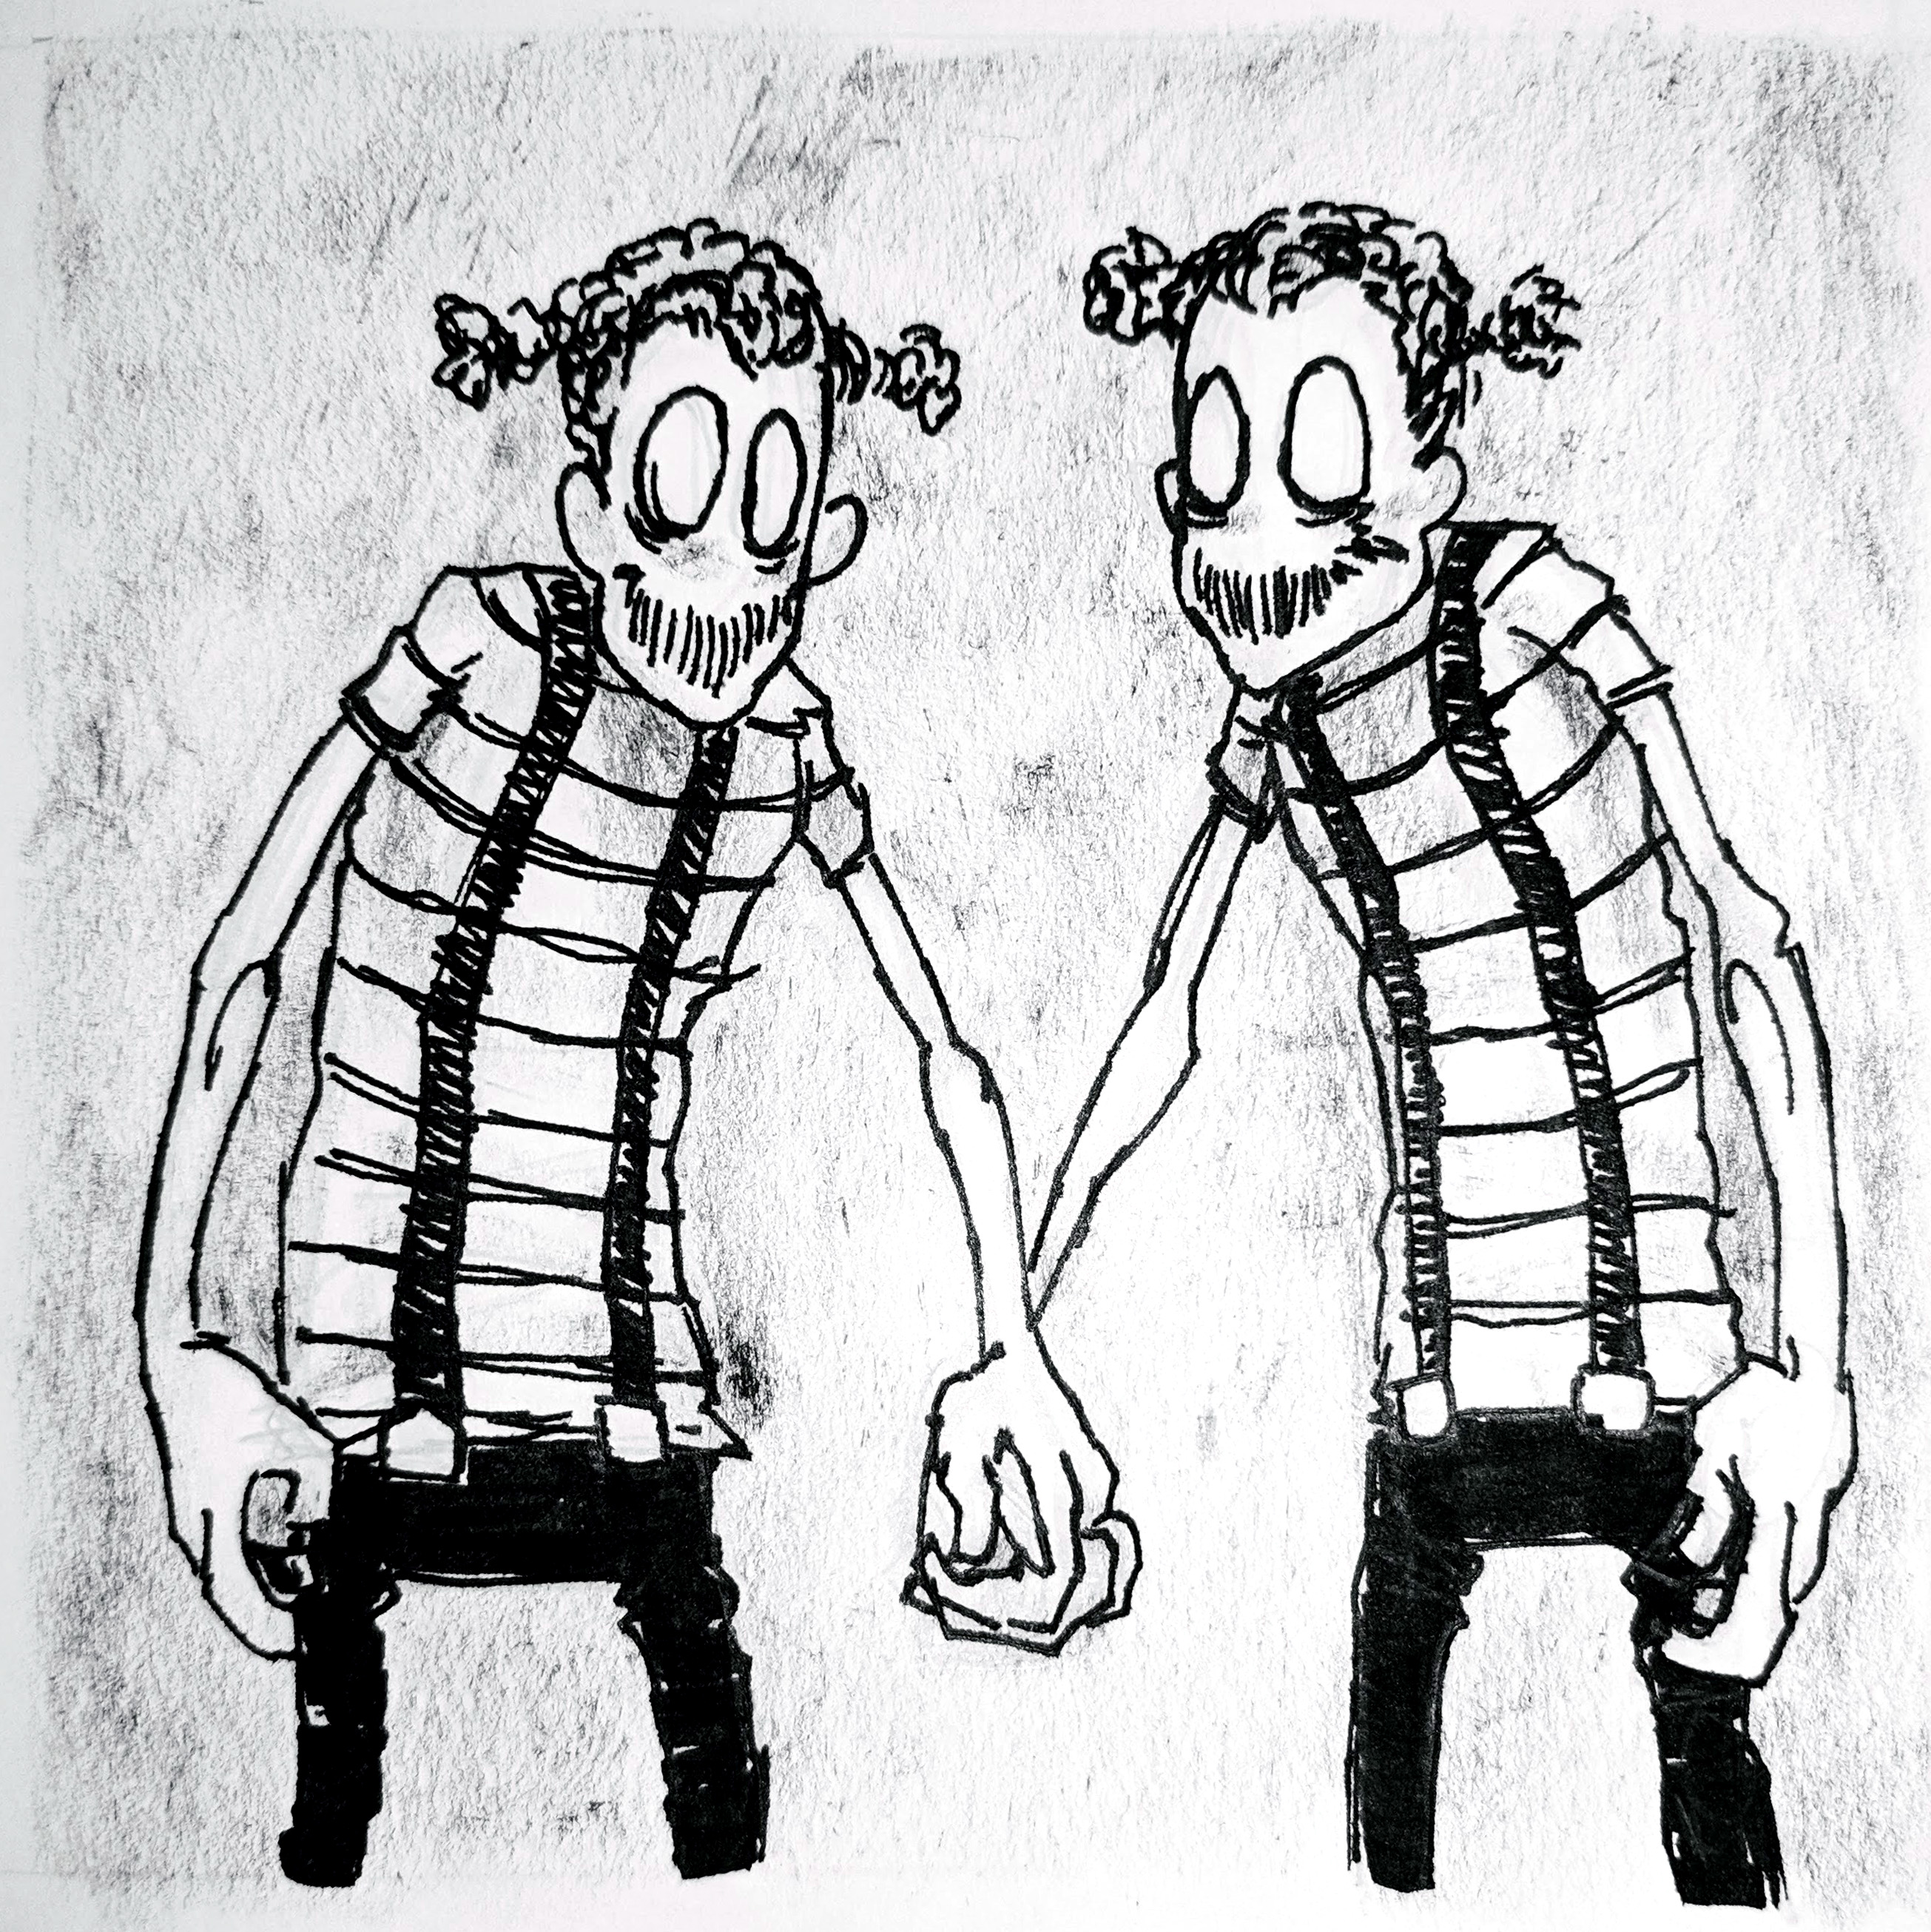 Twin evil clown-ish characters holding hands